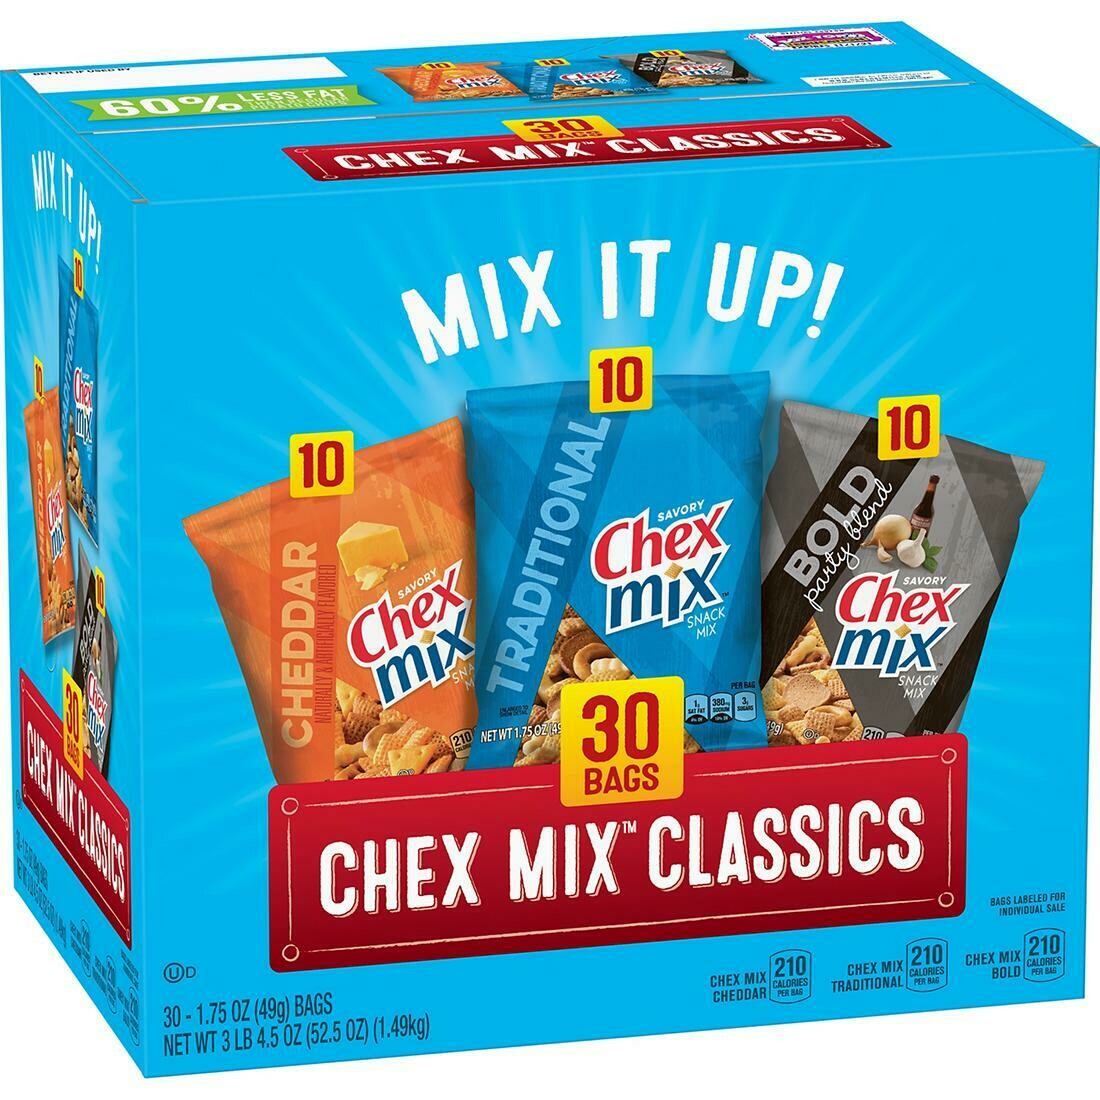 Chex Mix Variety Pack Box 30ct (10 cheddar, 10 traditional, 10 bold party blend)